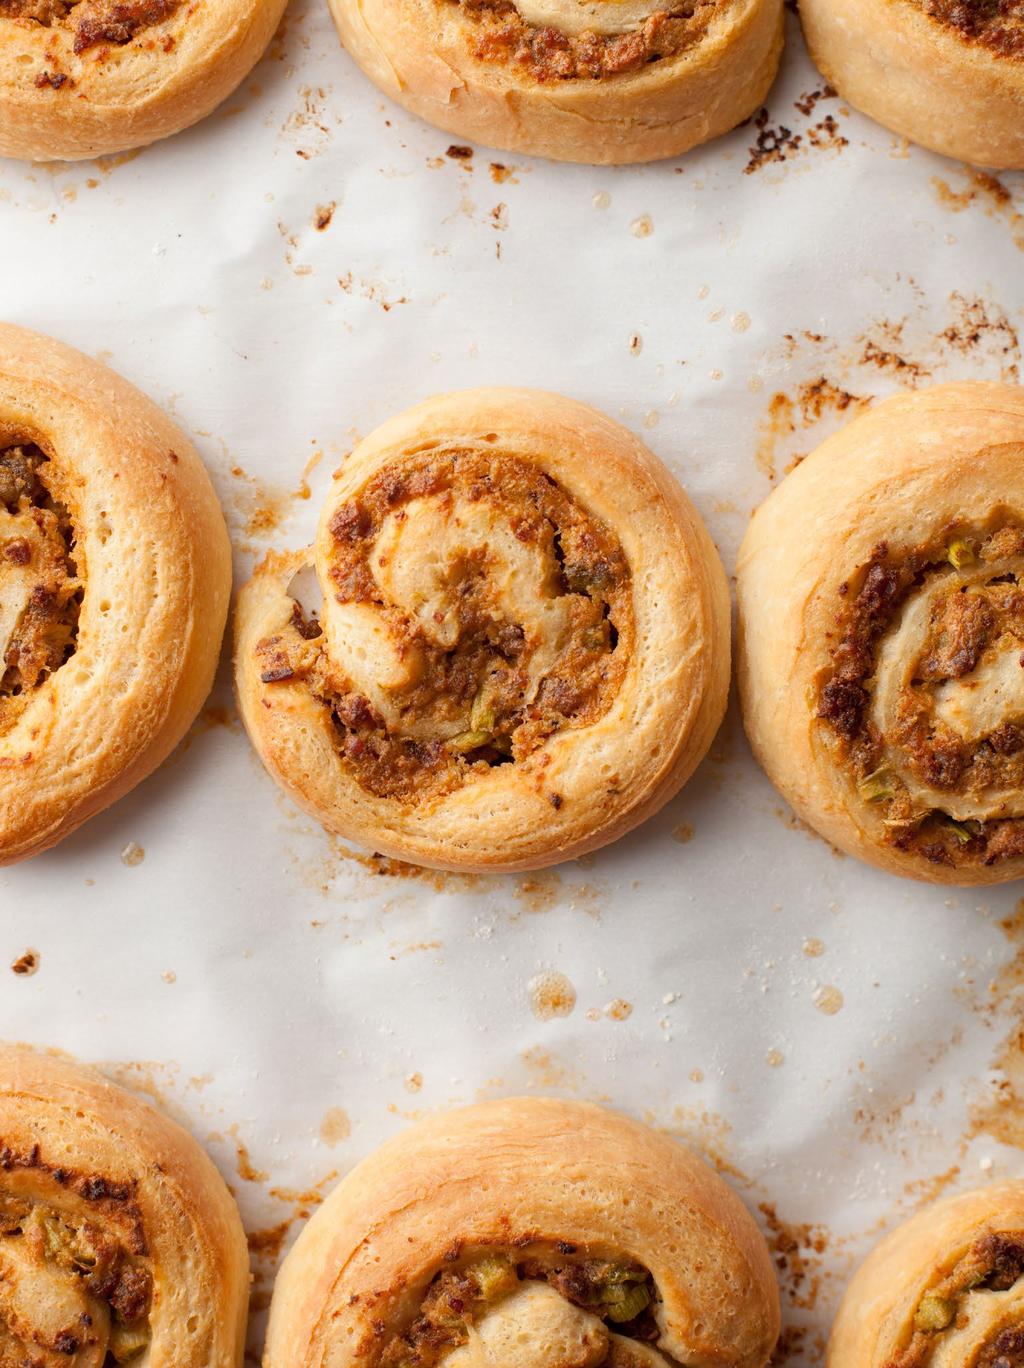 Chipotle Sausage Bacon Pinwheels Makes about 36 rolls Pinwheel Dough: 3 cups unbleached bread flour 1 cup white whole wheat flour 2 cups milk 4 Tablespoons unsalted butter, plus extra for the bowl 2